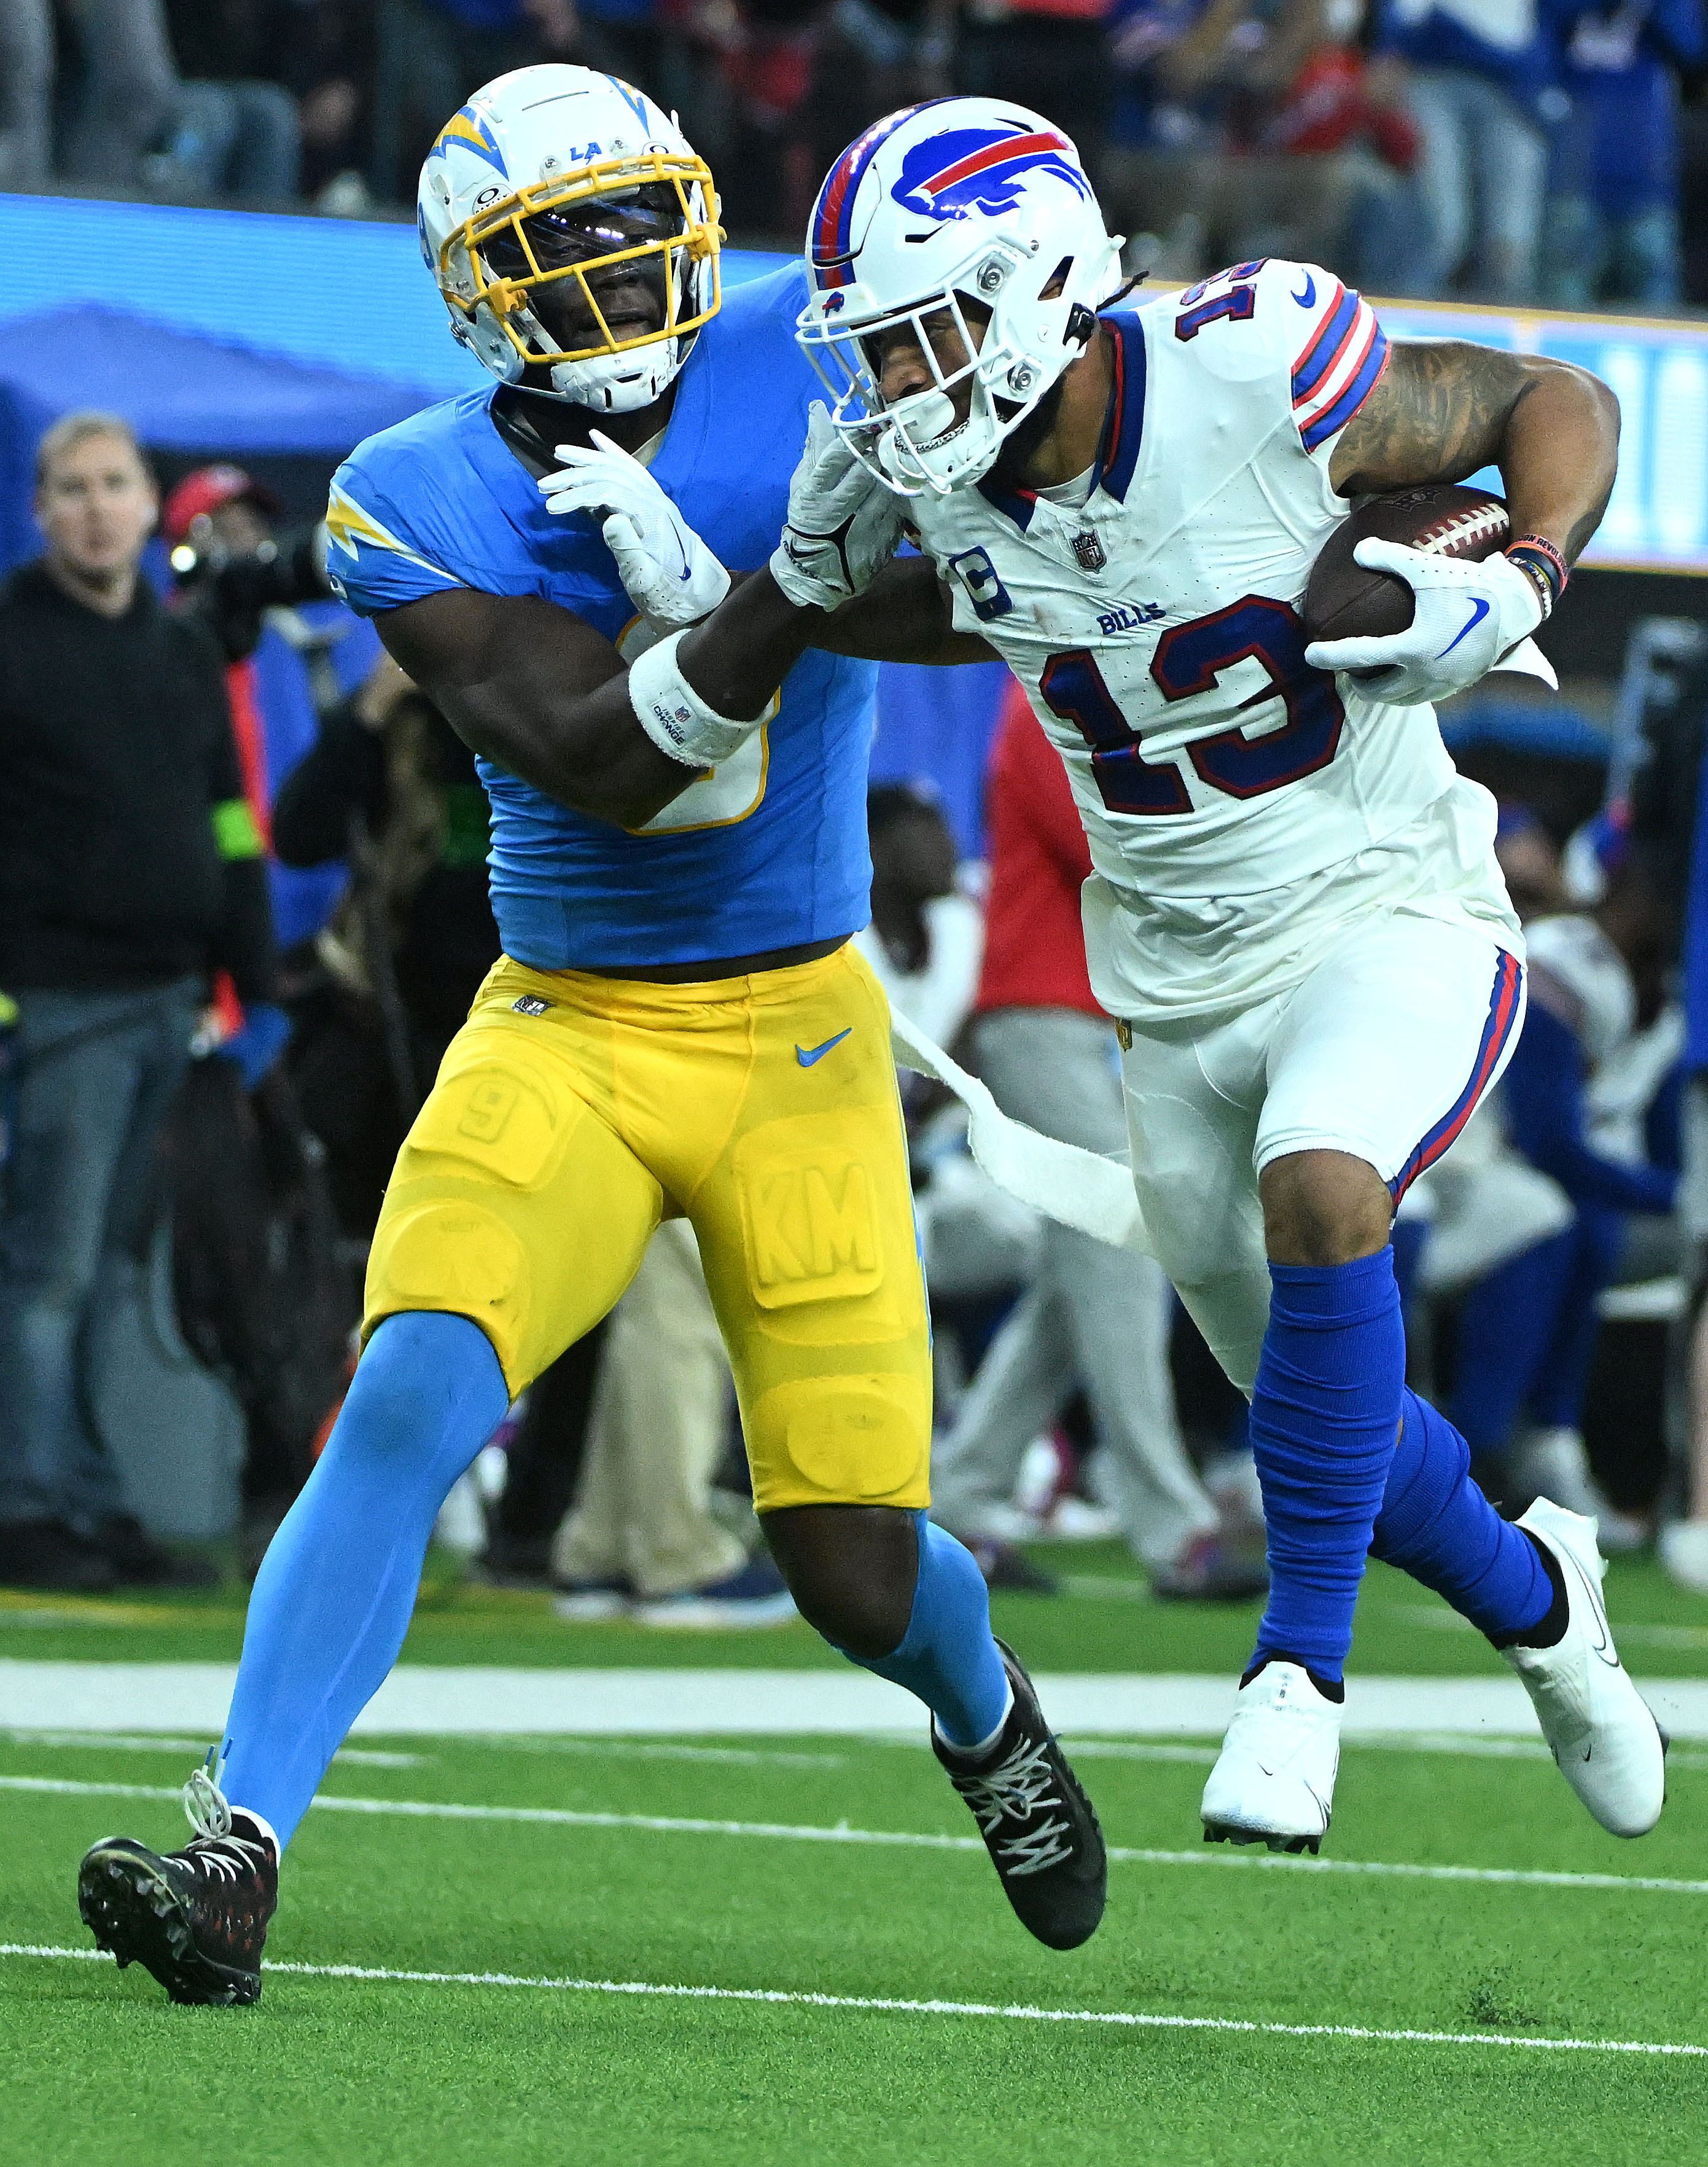 Los Angeles Chargers Host The Buffalo Bills In An NFL Game At SoFi Stadium